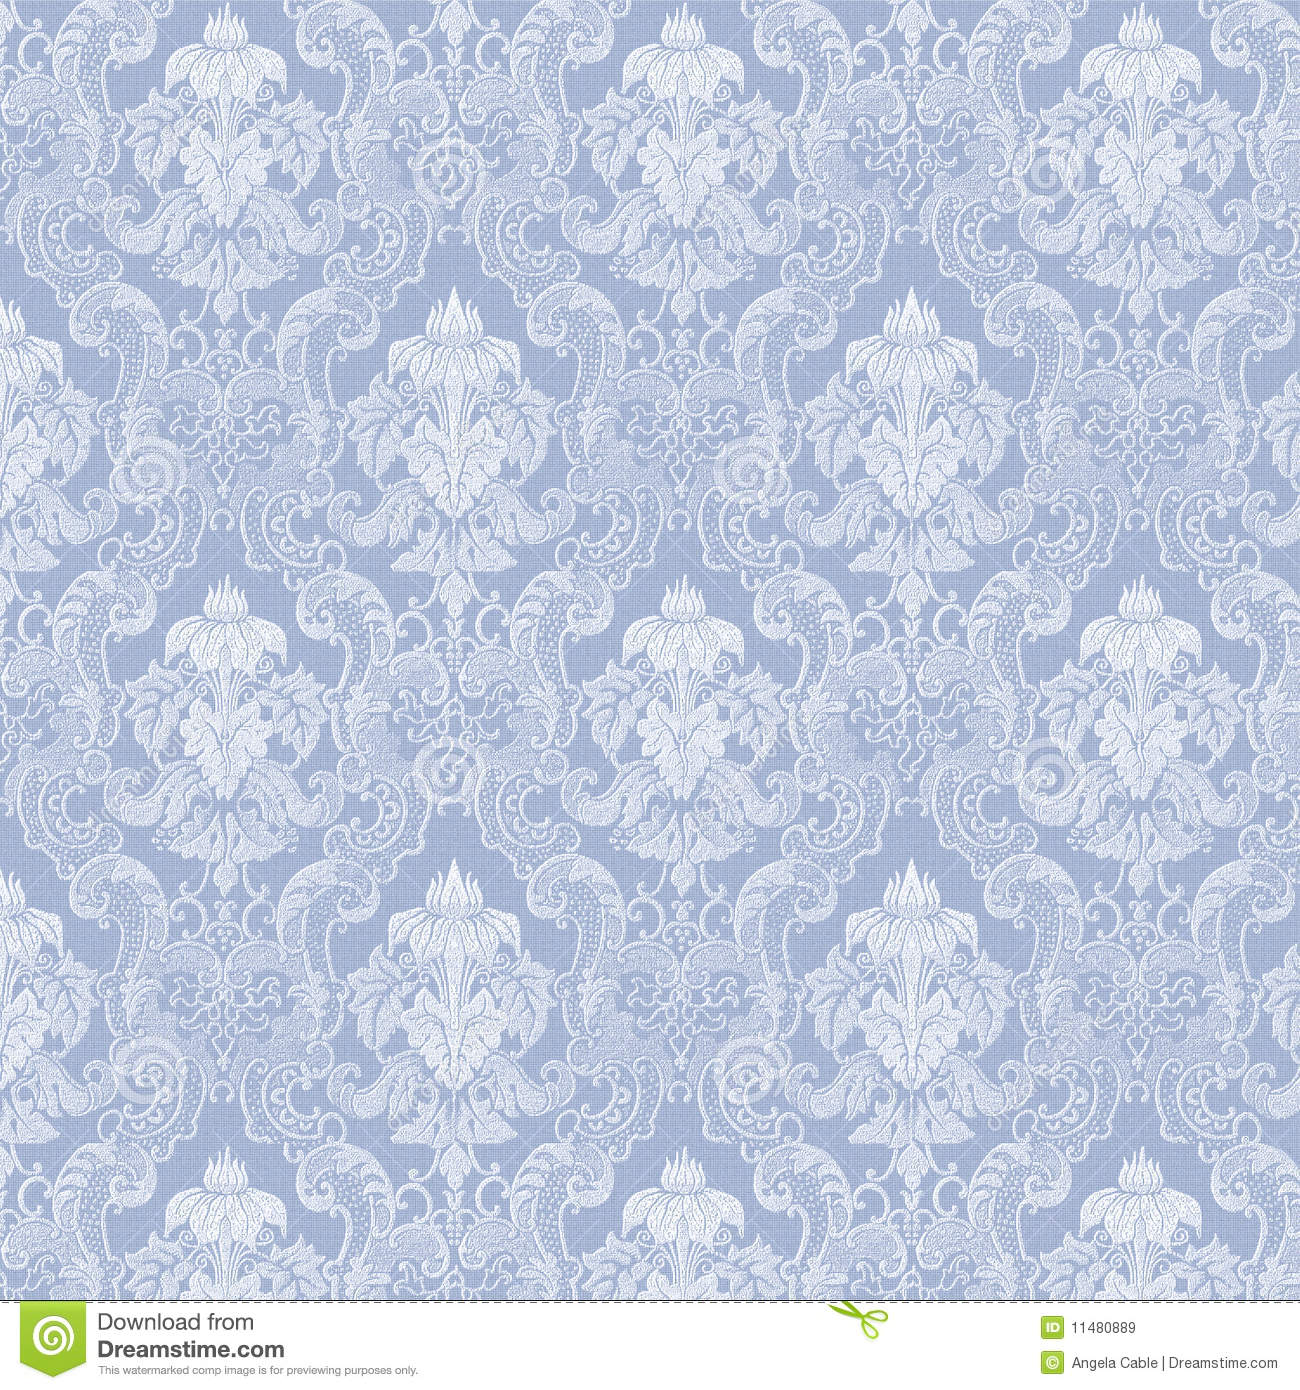 Digitally Created Background Of White Lace Against A Blue Background